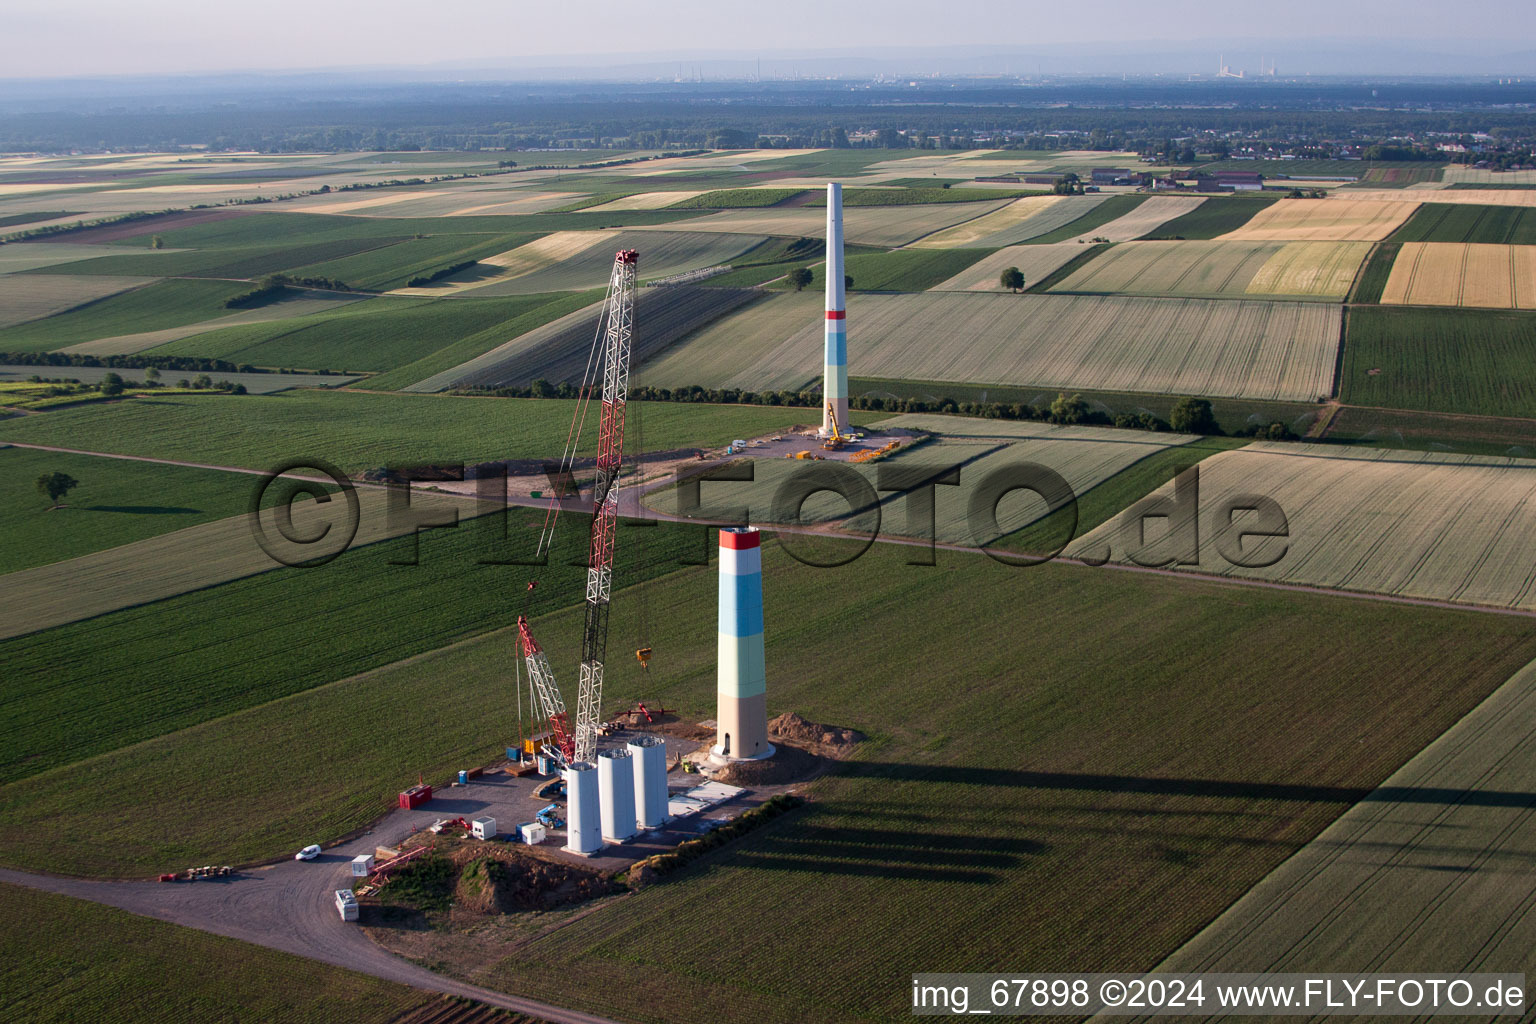 New wind farm in Offenbach an der Queich in the state Rhineland-Palatinate, Germany seen from a drone